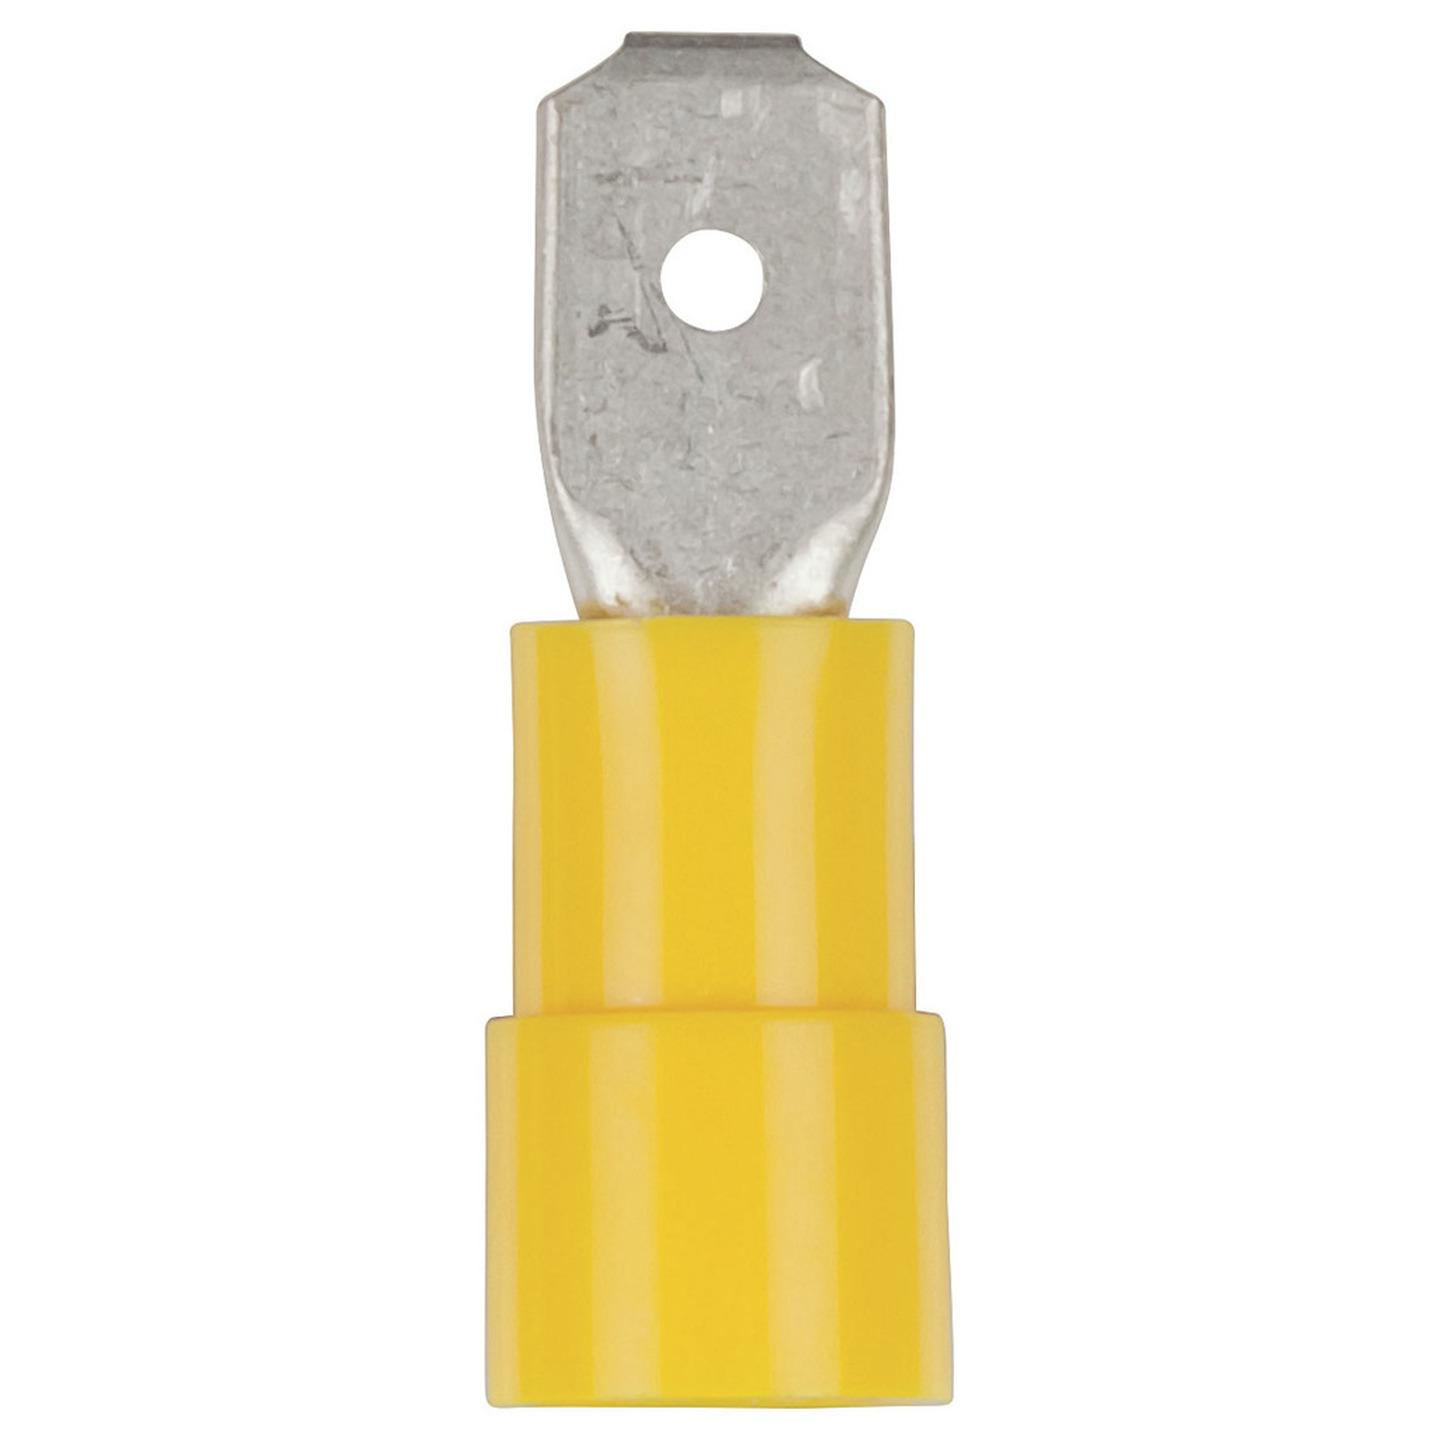 Male Spade - Yellow - Pack of 8